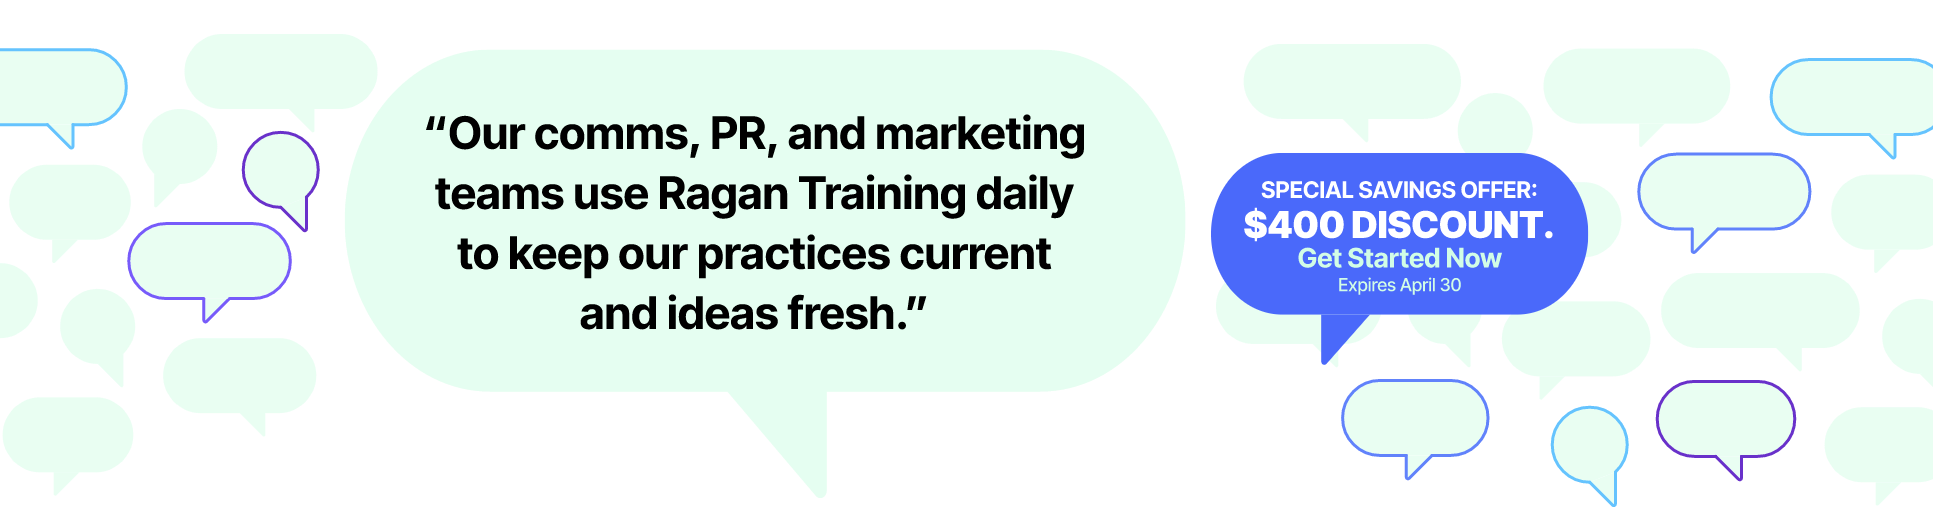 “Our comms, PR, and marketing teams use Ragan Training daily to keep our practices current and ideas fresh.”